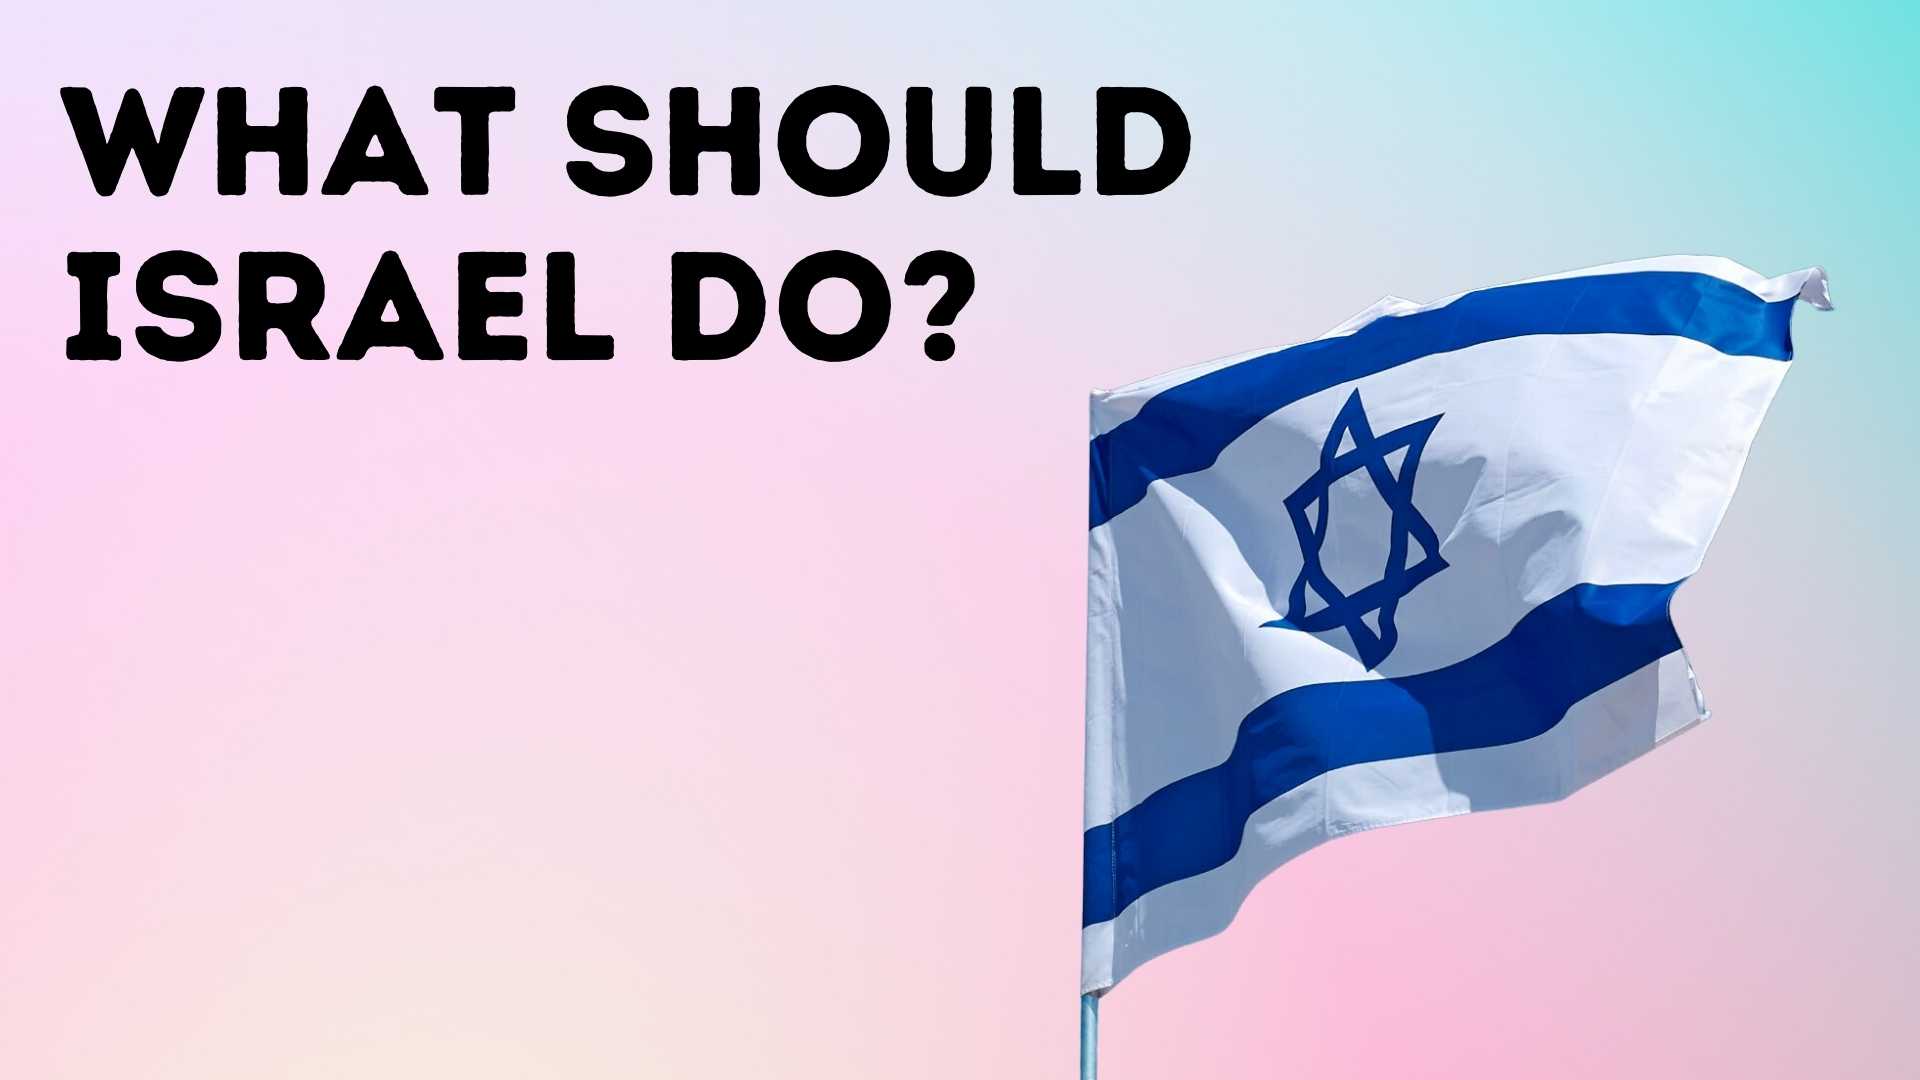 What should Israel do?